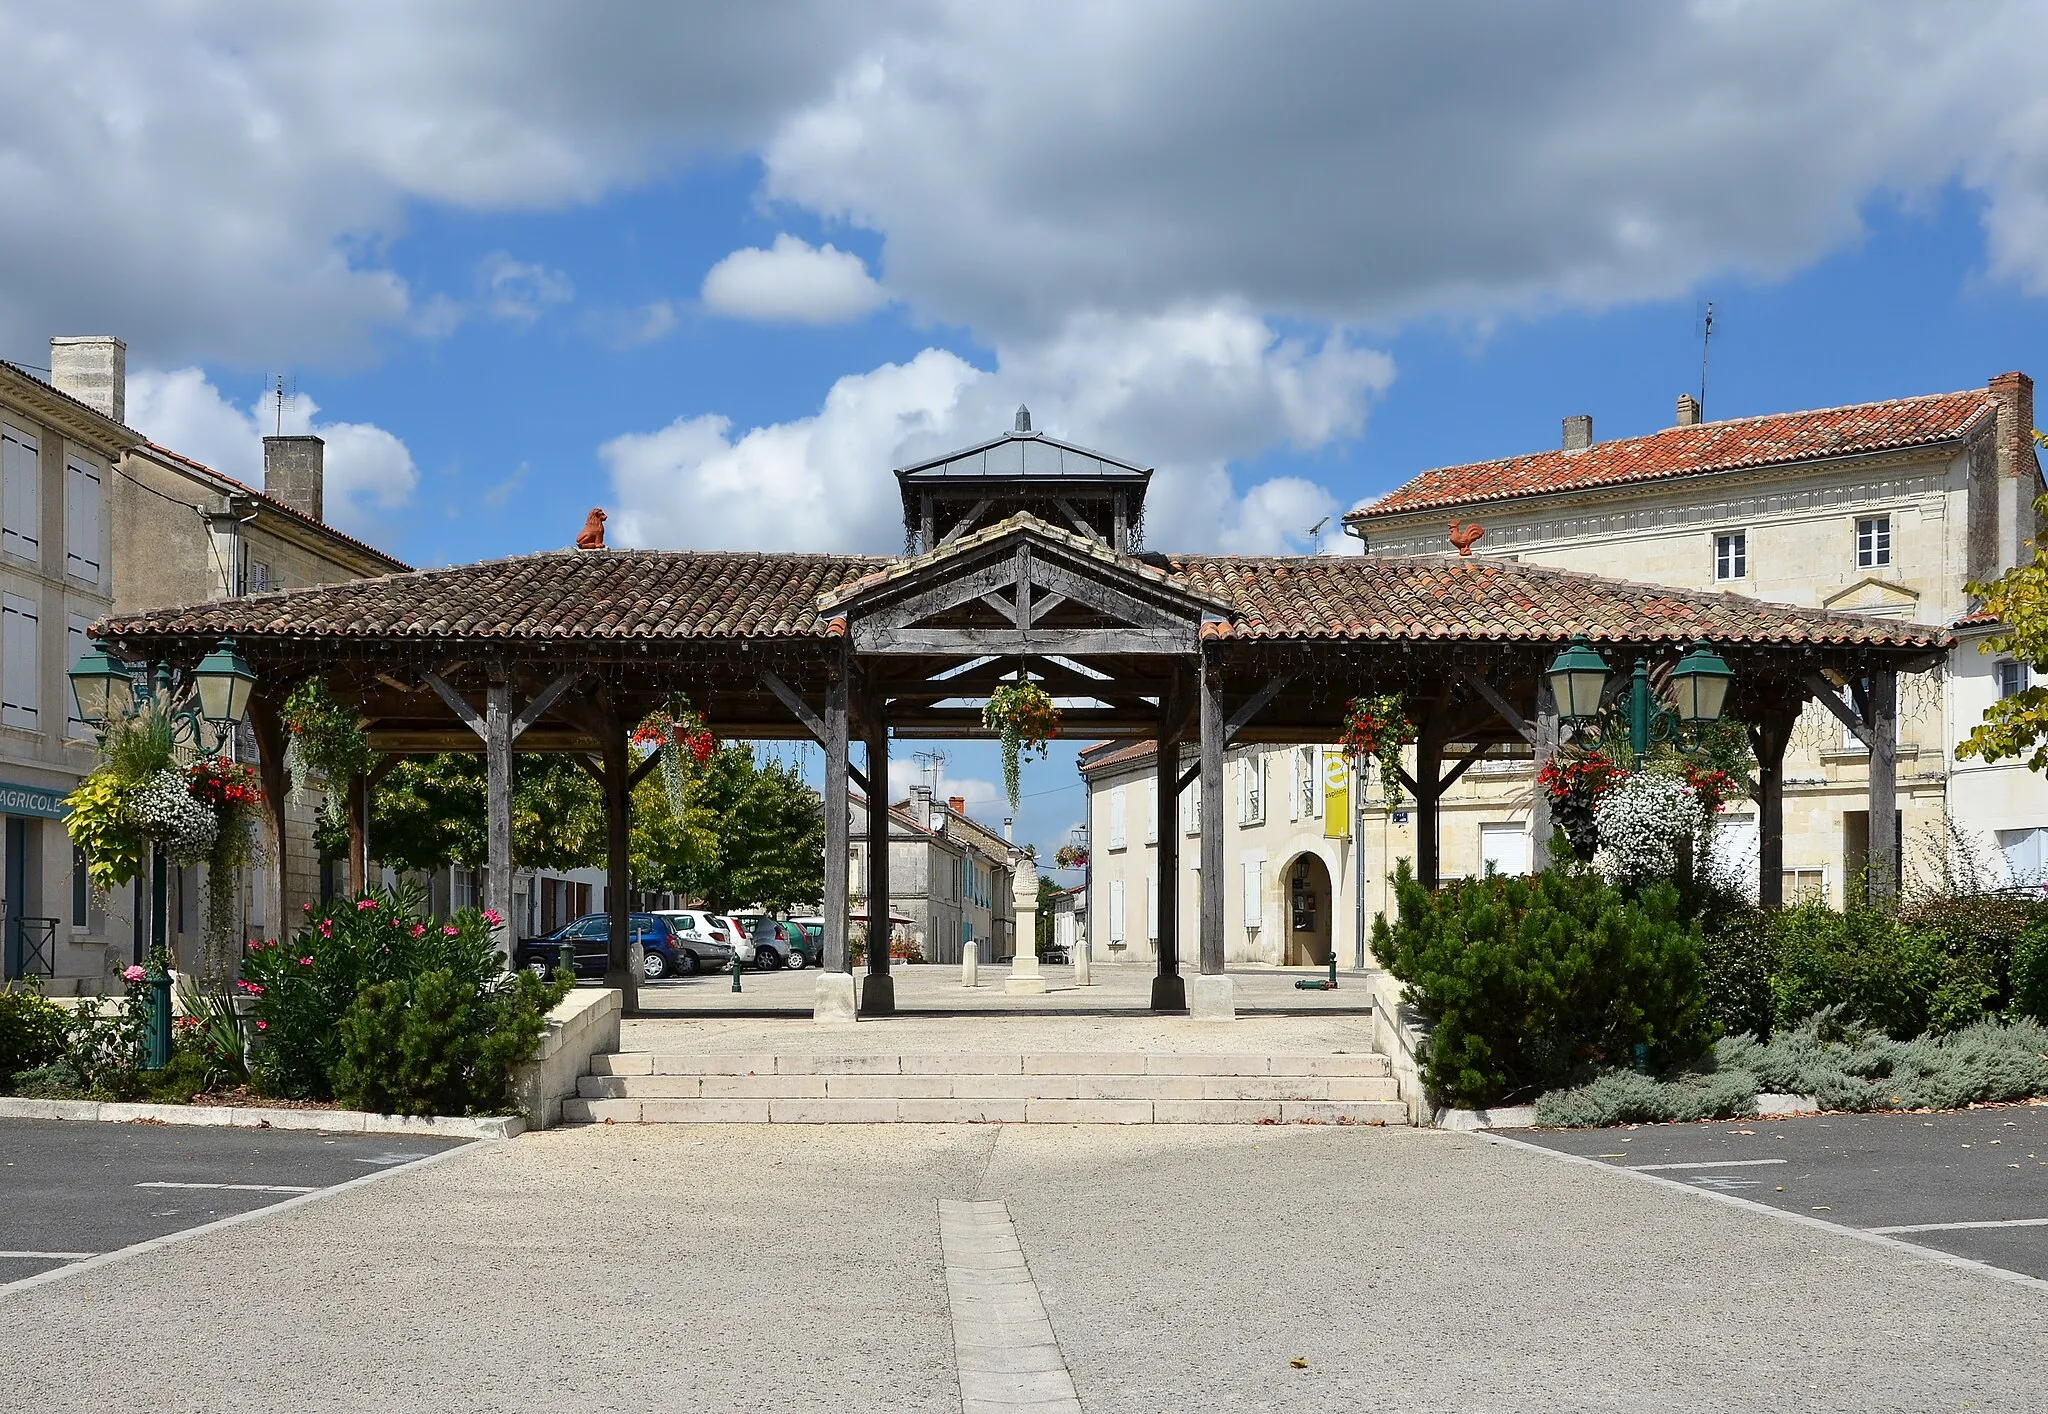 Photo showing: Market hall (repaired in 1808 and 1961) of Baignes-Sainte-Radegonde, Charente, France.